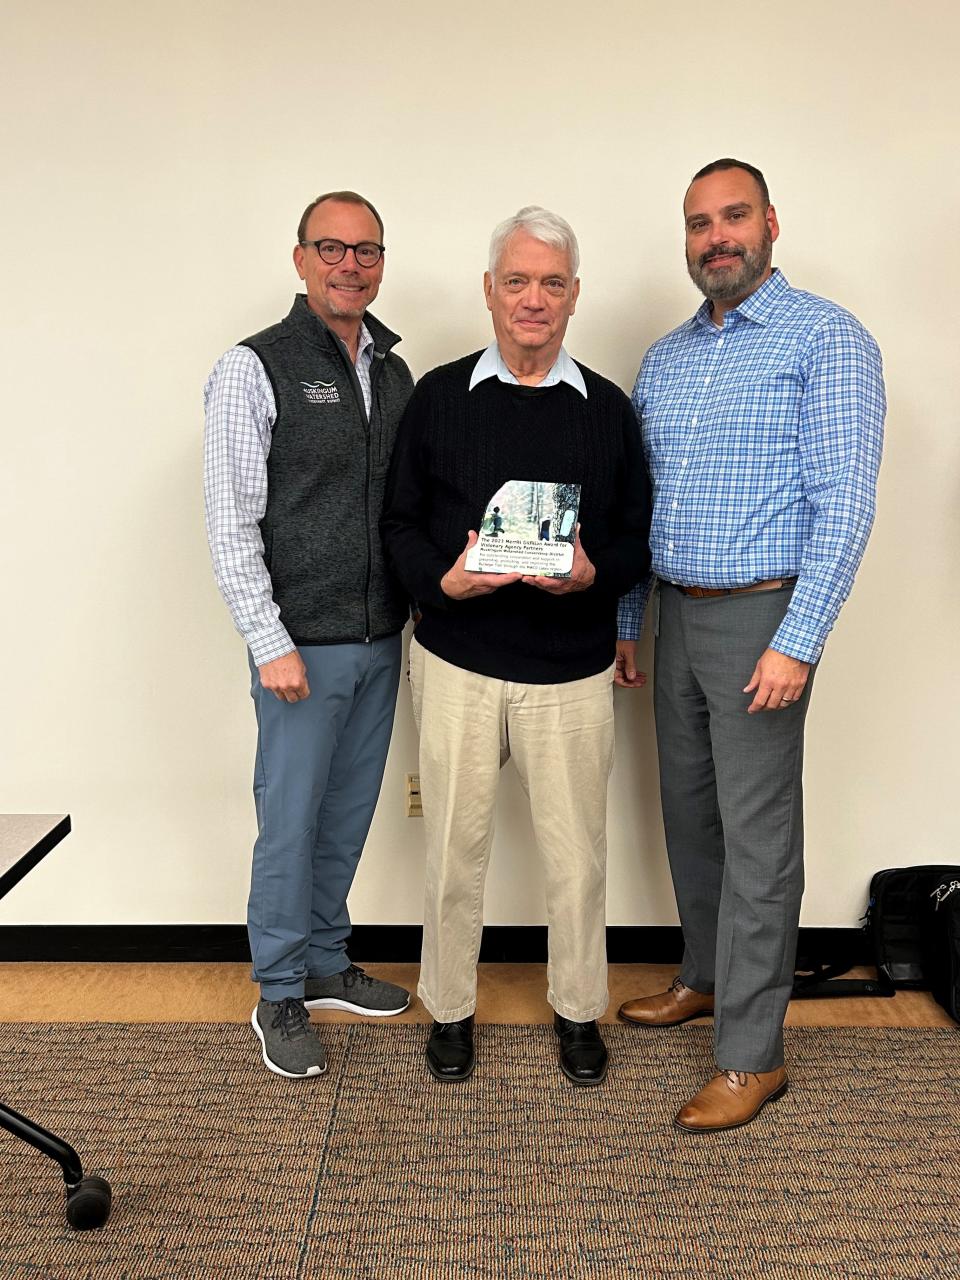 From left: Craig Butler, Muskingum Watershed Conservancy District executive director, Steve Walker, Buckeye Trail Association and Eric Stechschulte, MWCD deputy chief projects and planning with the Merrill Gilfillan Award for Visionary Agency Partners award.